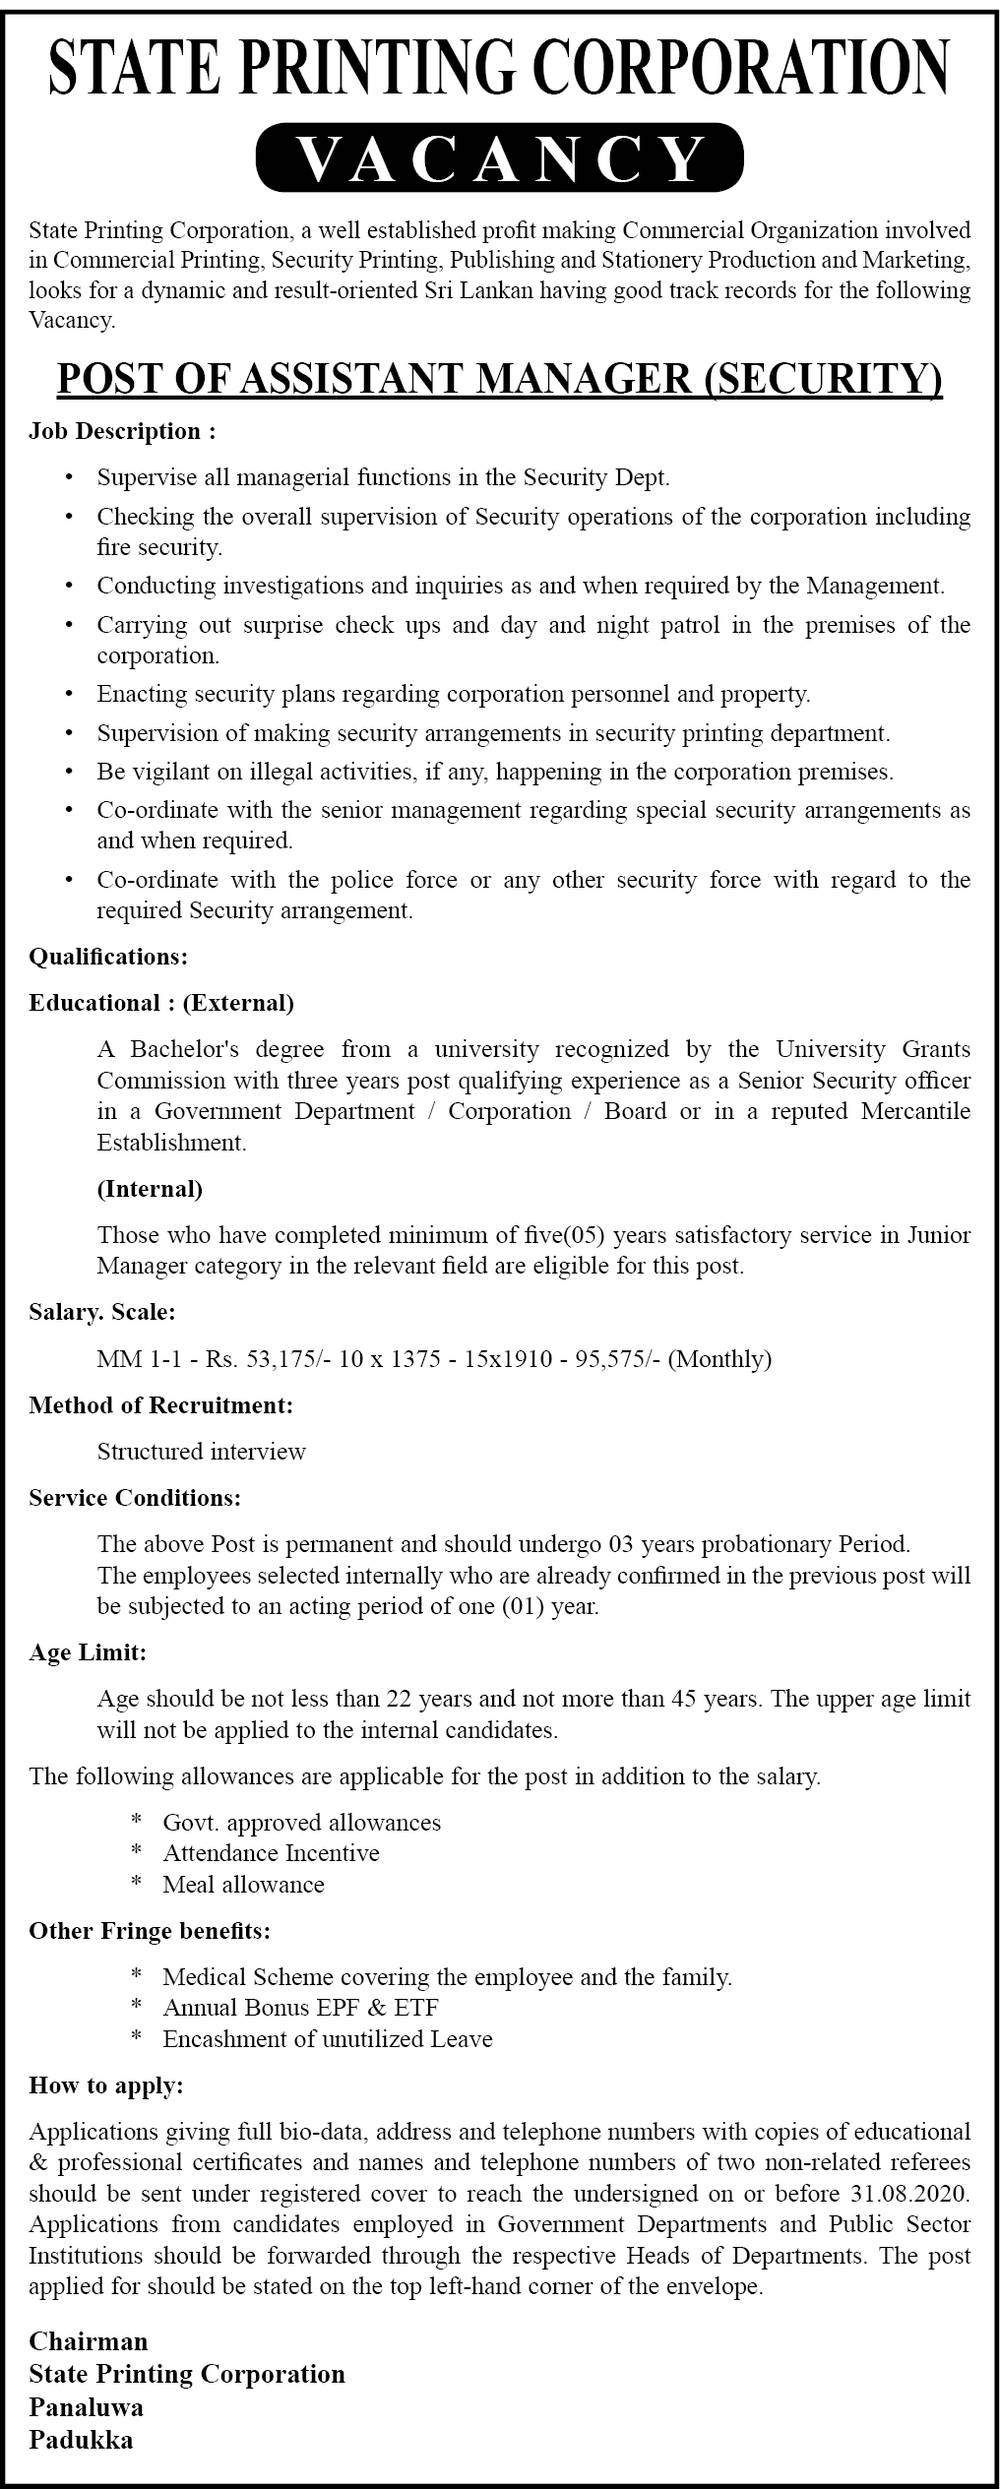 Assistant Manager (Security) – State Printing Corporation